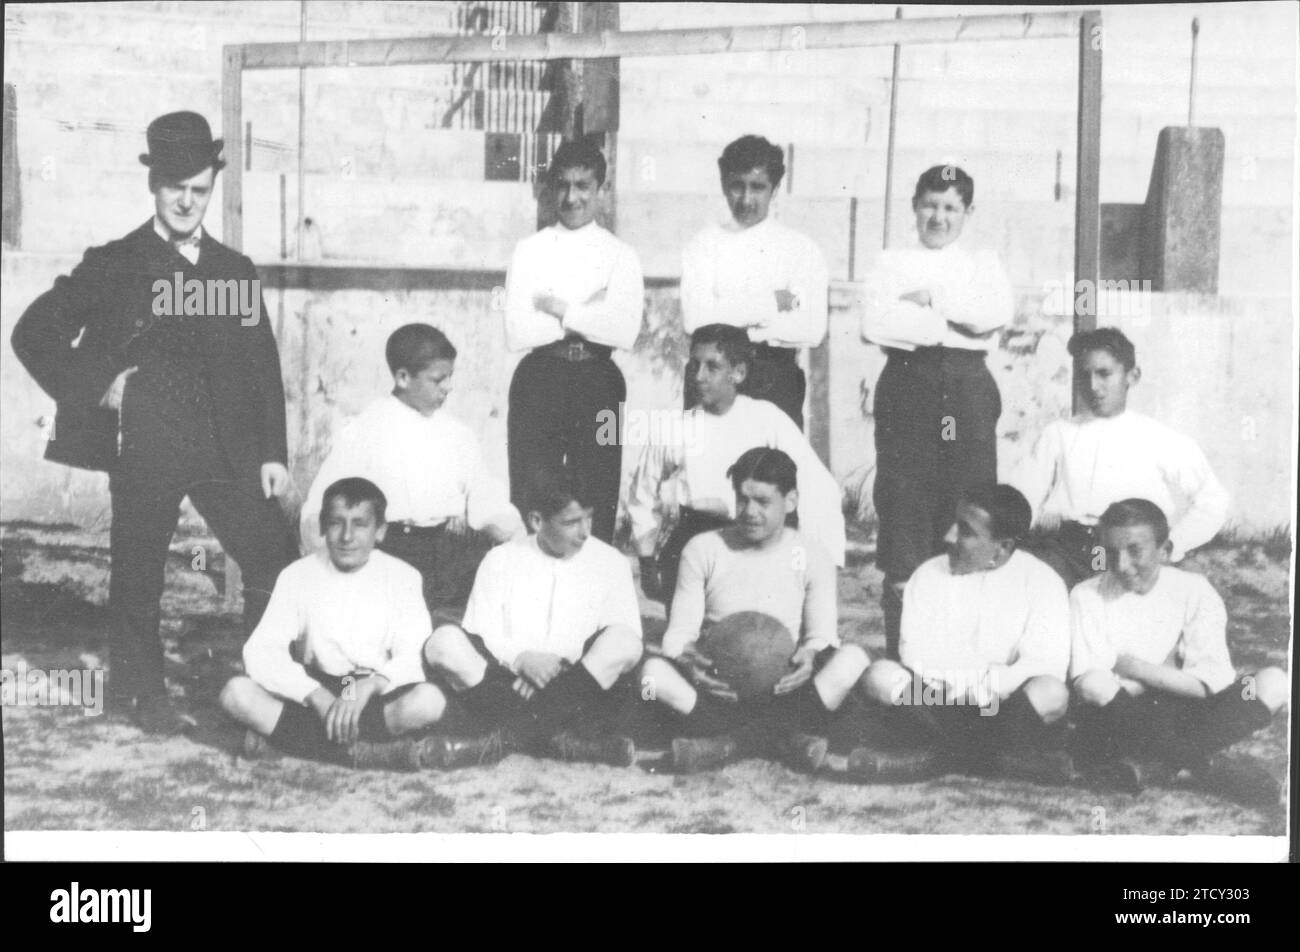 01/01/1903. La Coruña, 1906. The bullring was the cradle of A Coruña football. In the image we can see the first children's team whose front line was made up of M. Álvarez, Virgilio, Félix de Paz, Eugenio Uría and Luis Tasende. Credit: Album / Archivo ABC / Foto Blanco Stock Photo